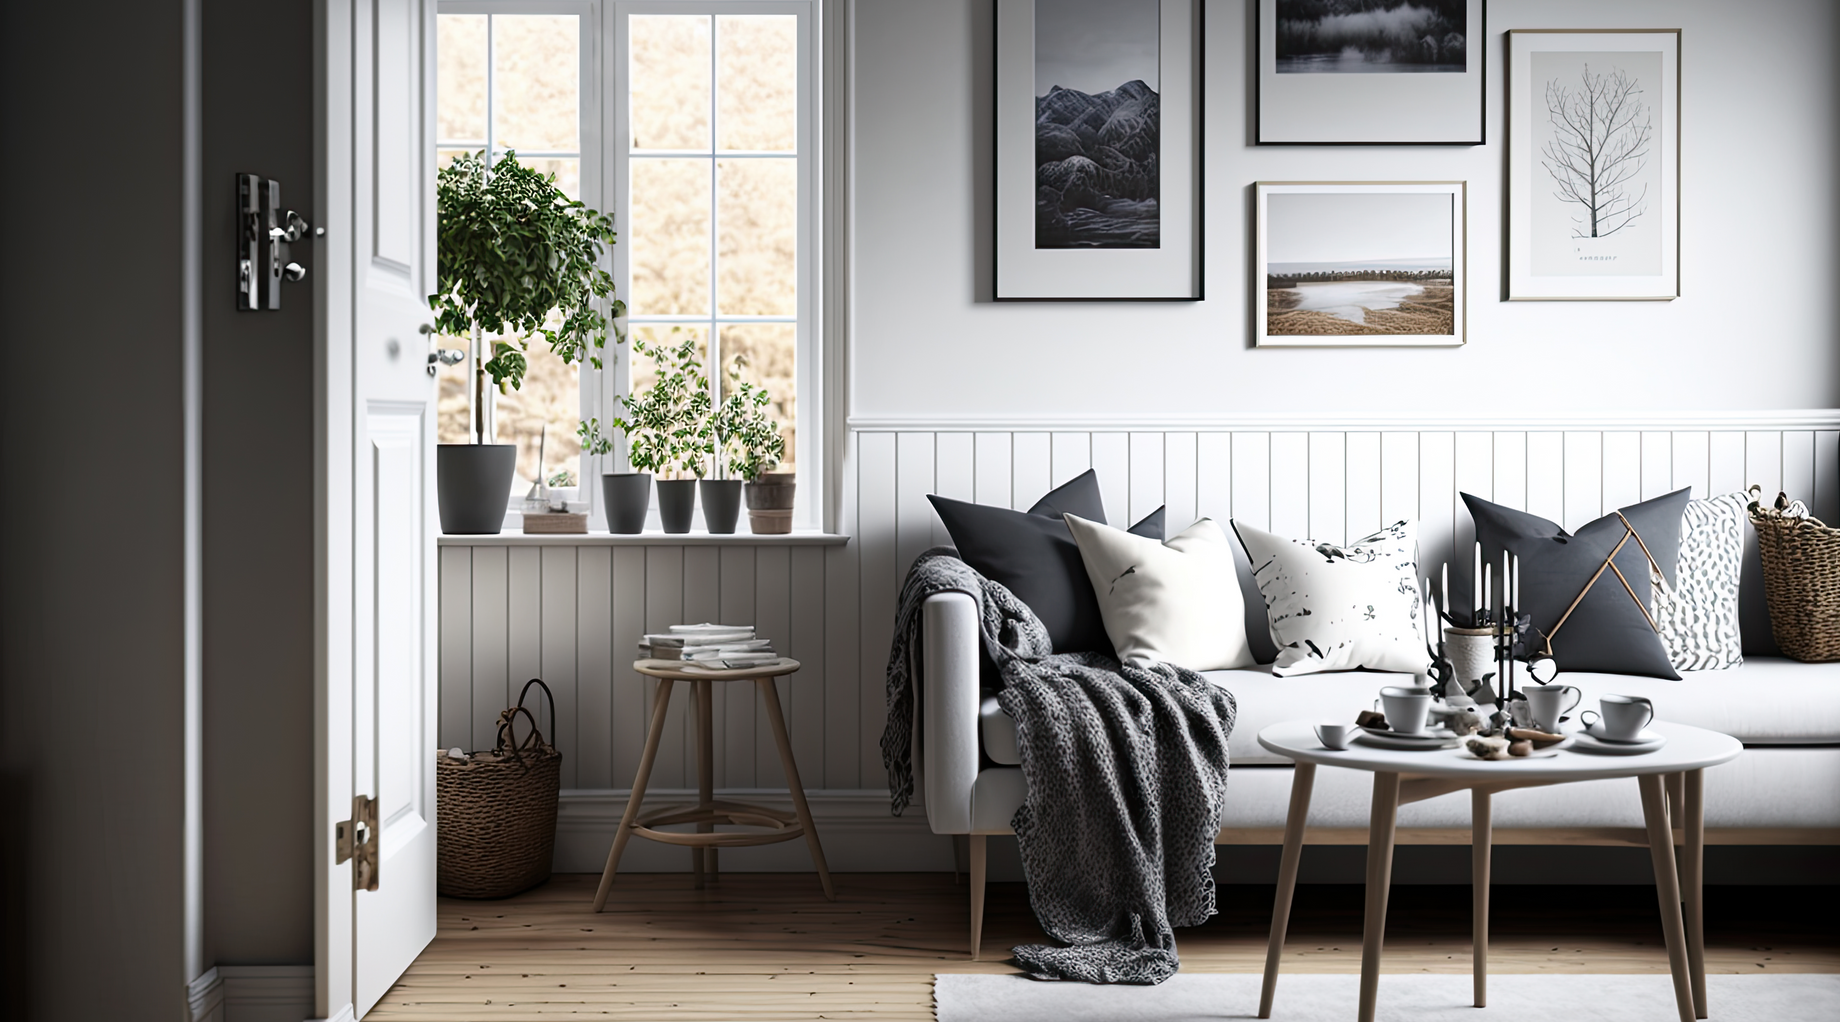 Scandinavian Design: What You Need to Know